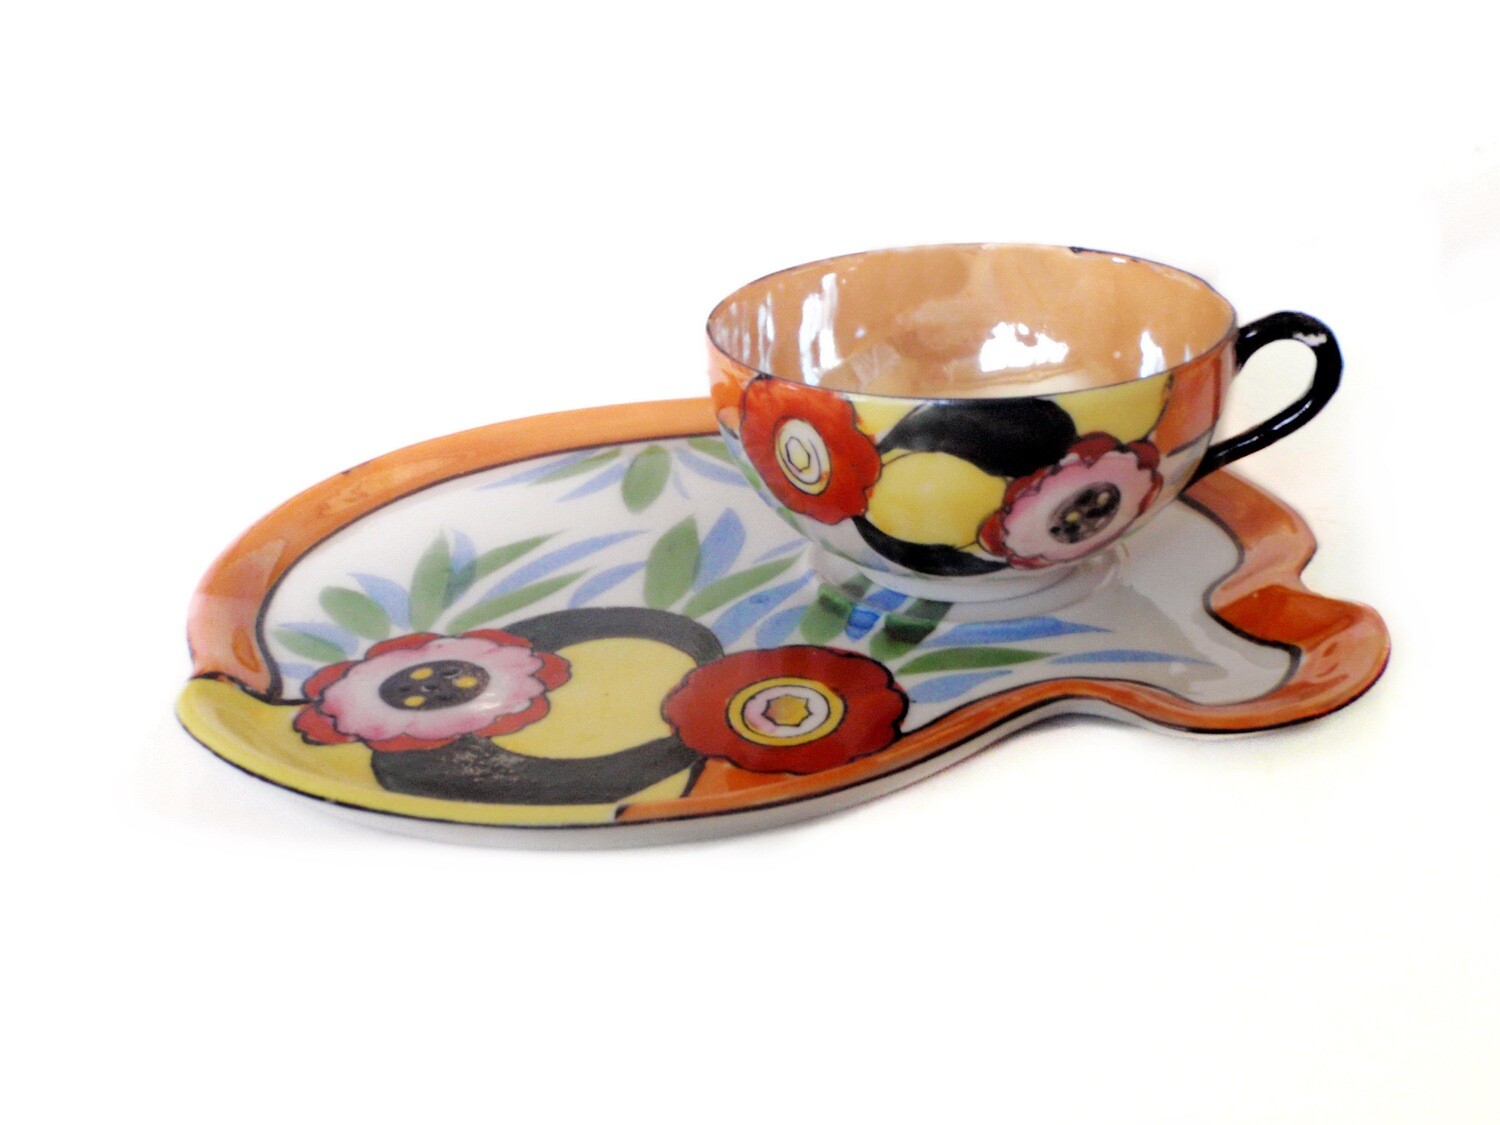 1920s Hand Painted Snack Luncheon Set